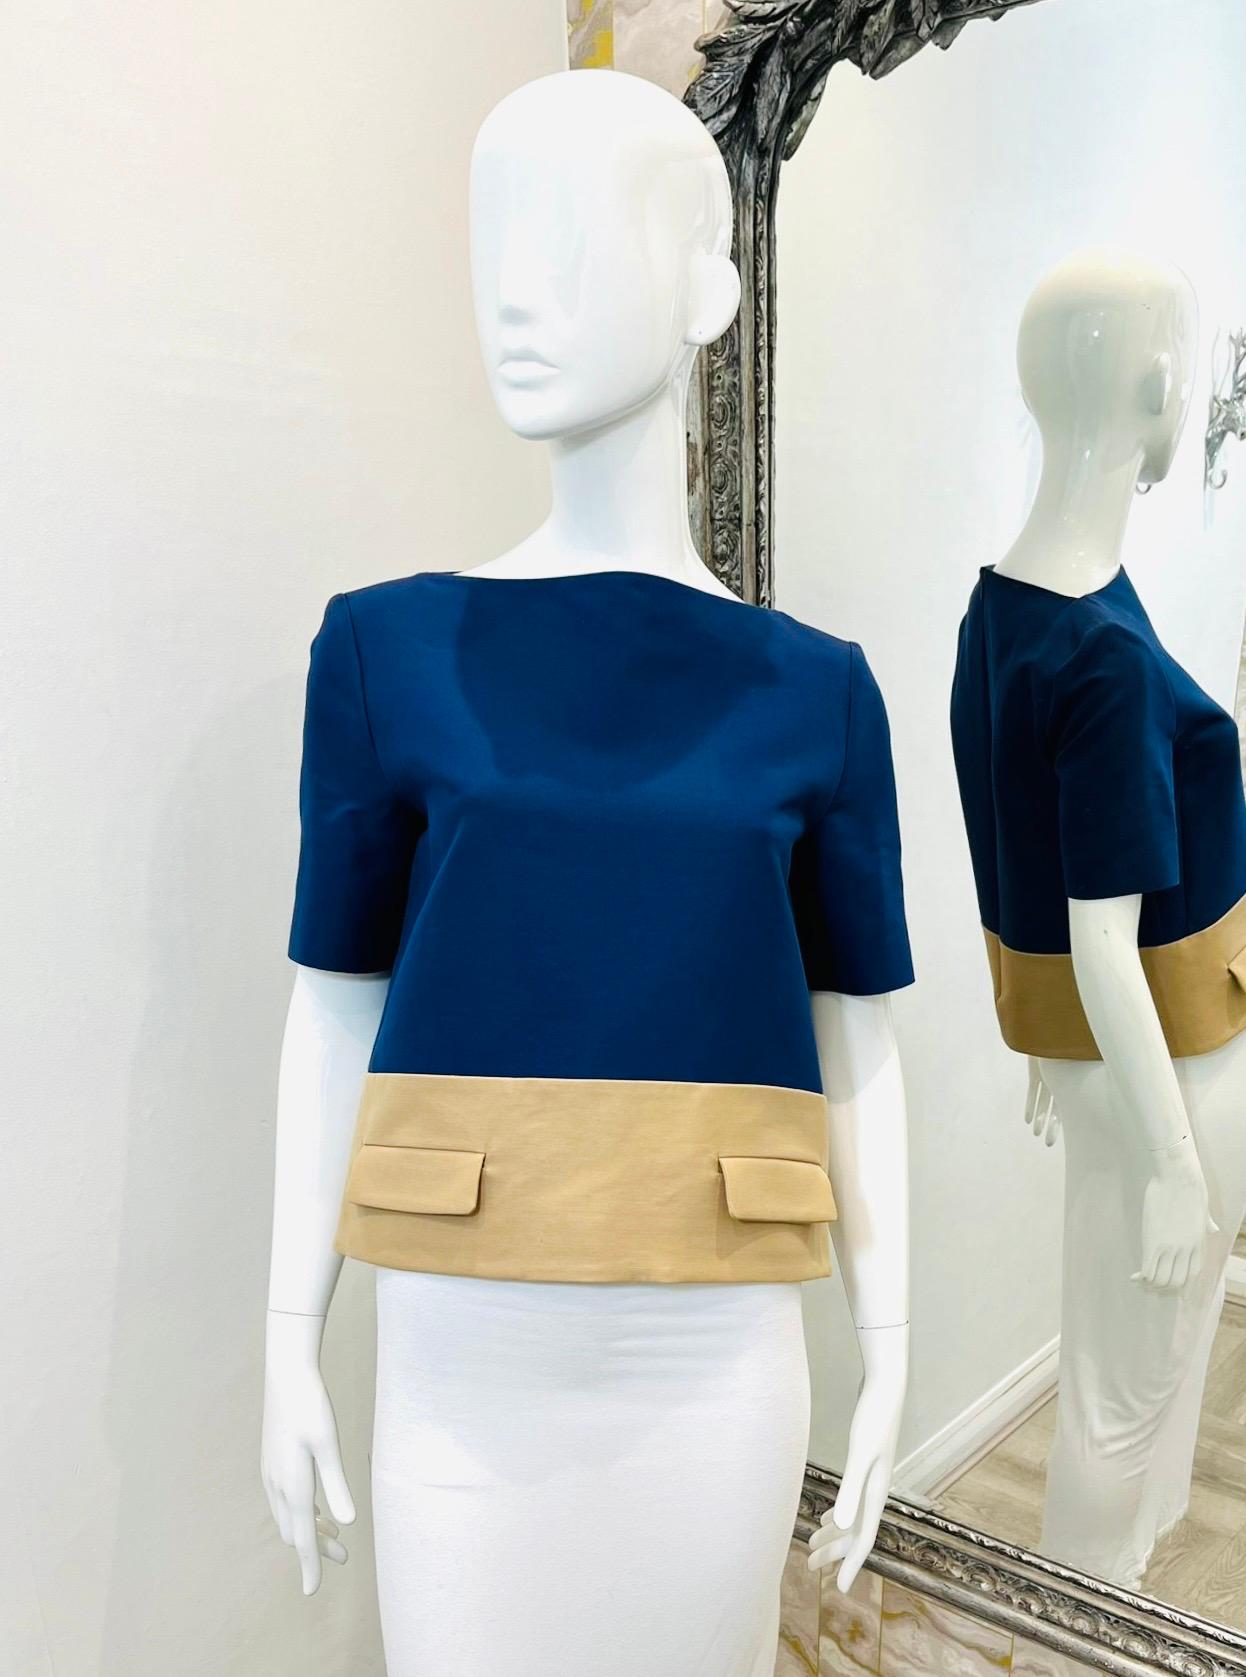 Marni Colour Block Cotton Top

Short sleeved top designed with colour block pattern in navy and beige.

Featuring boat neckline, concealed zip closure to rear and two faux flap pockets to the front.

Size – 40IT

Condition – Very Good

Composition –